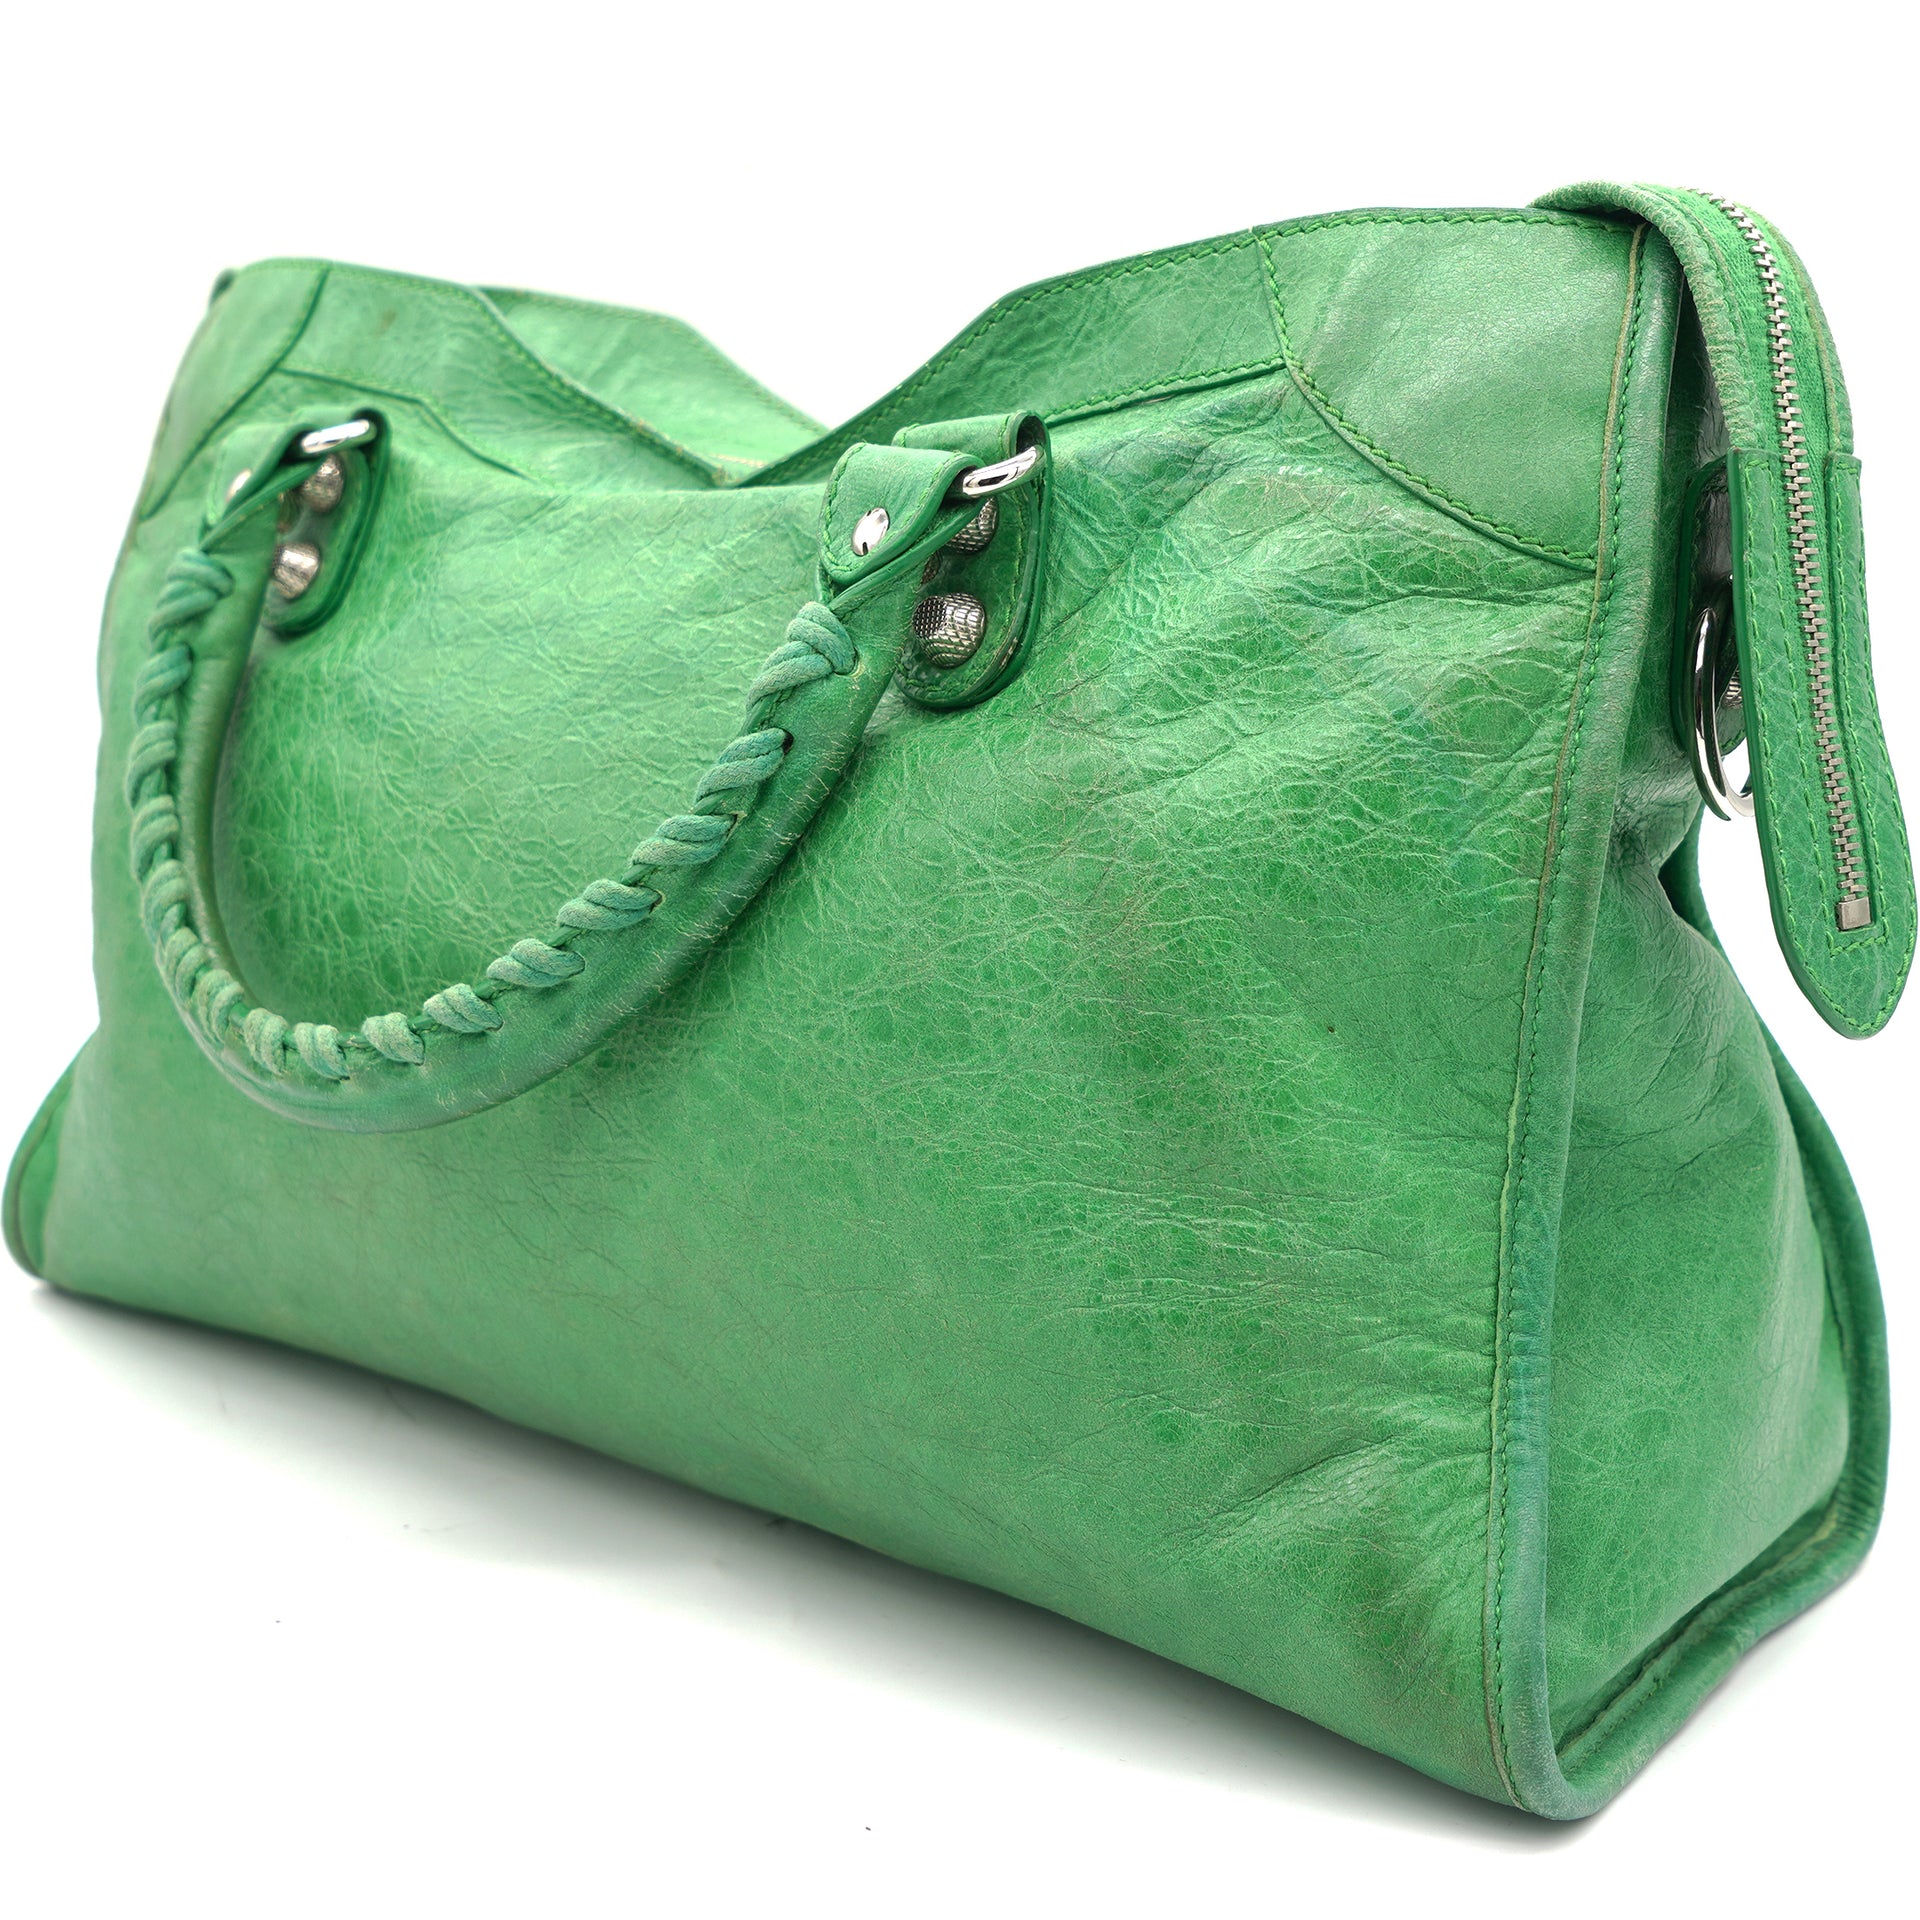 City Green Leather Giant Silver Hardware